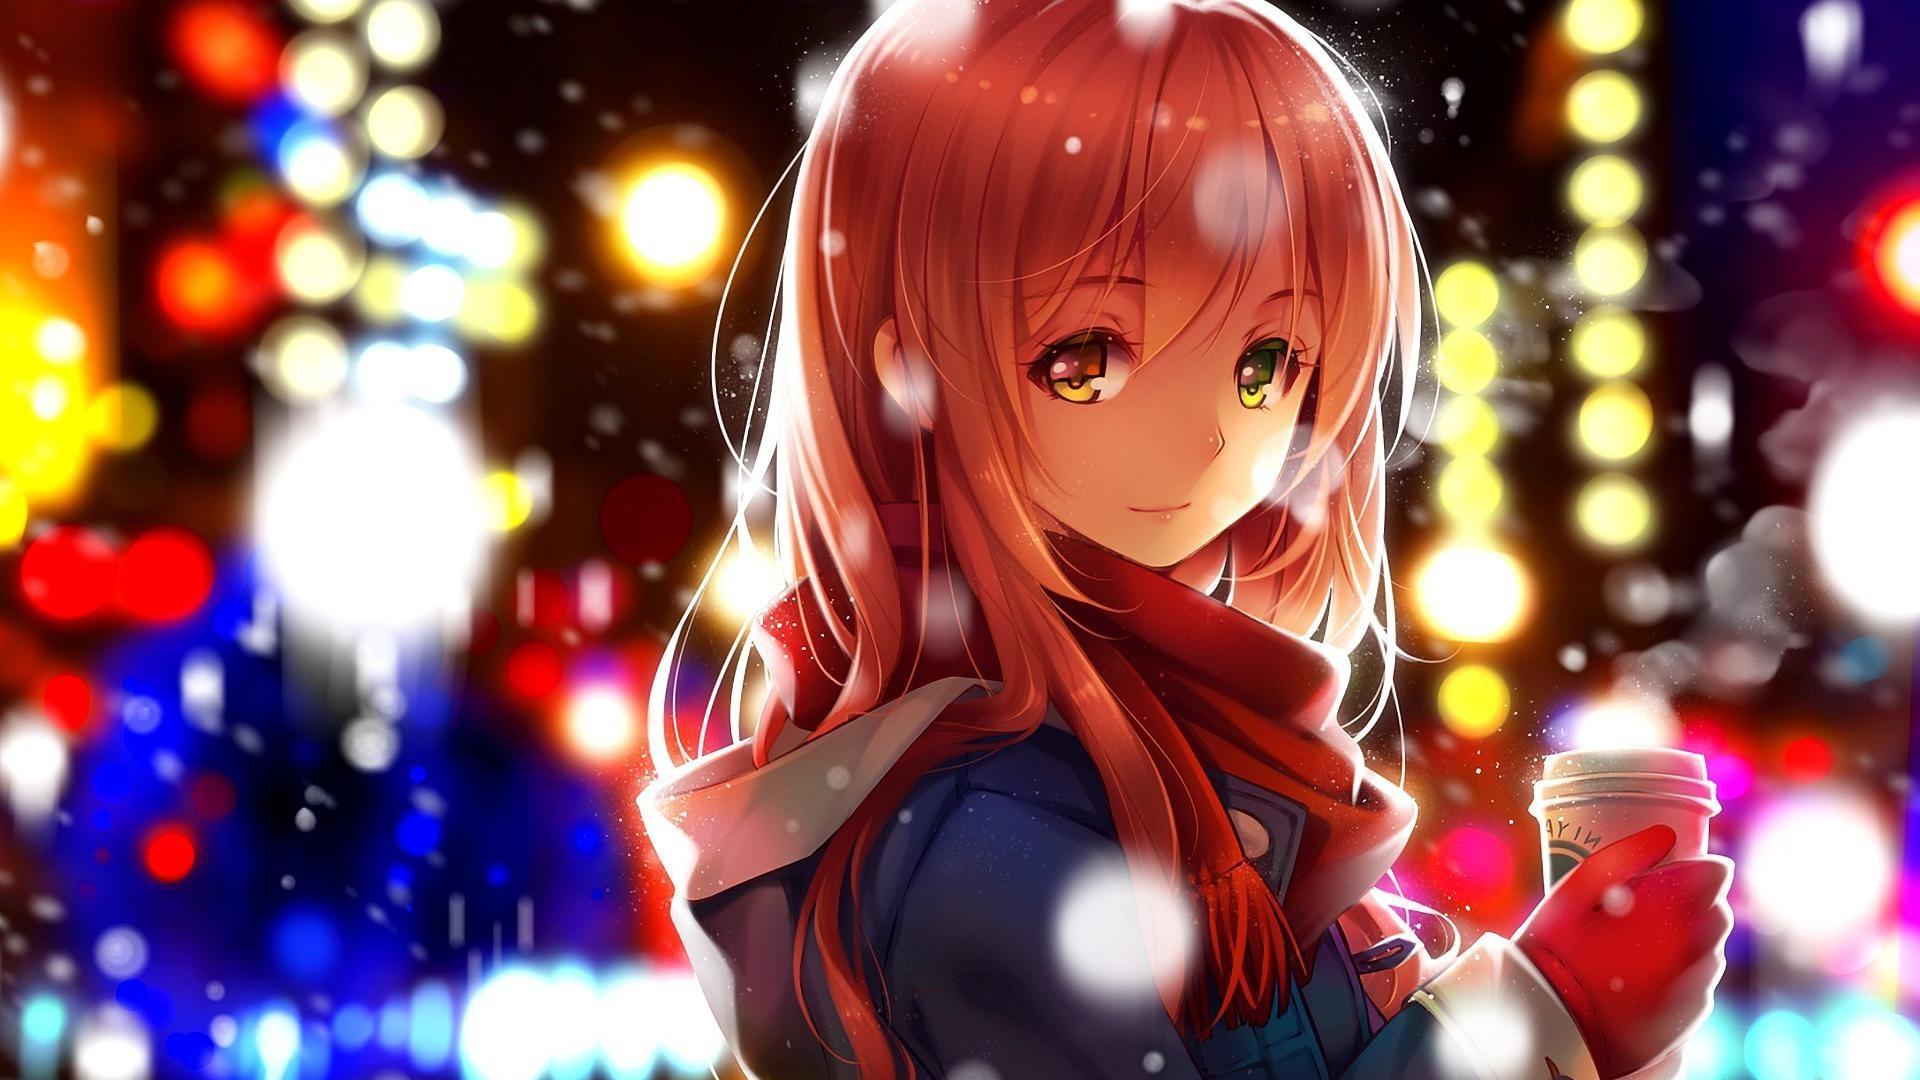 Best Anime Girl Character Wallpapers - Wallpaper Cave